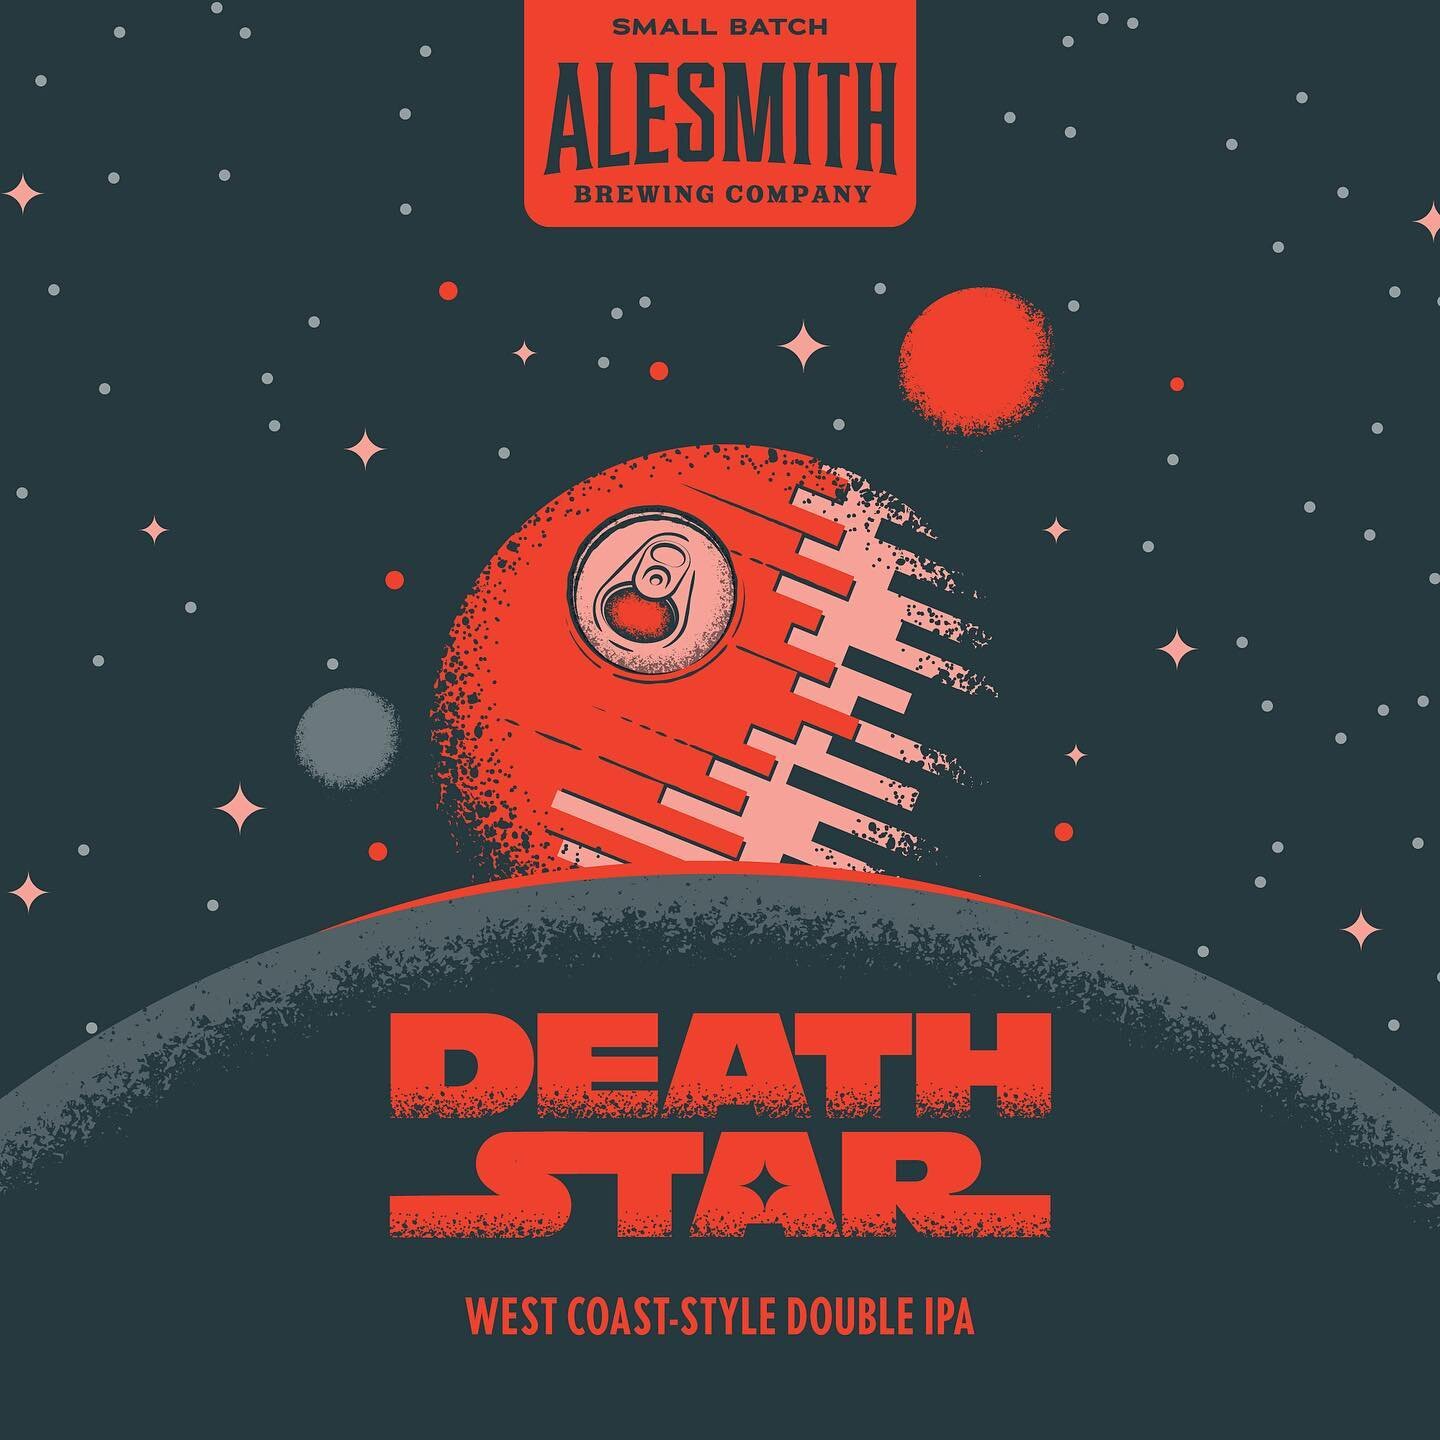 Fun Small Batch label for the force sensitive folks over at @alesmithbrewing #maythe4thbewithyou Reimagined Death Star that was really just a space party galaxy yacht spreading craft beer and good vibes across the cosmos.